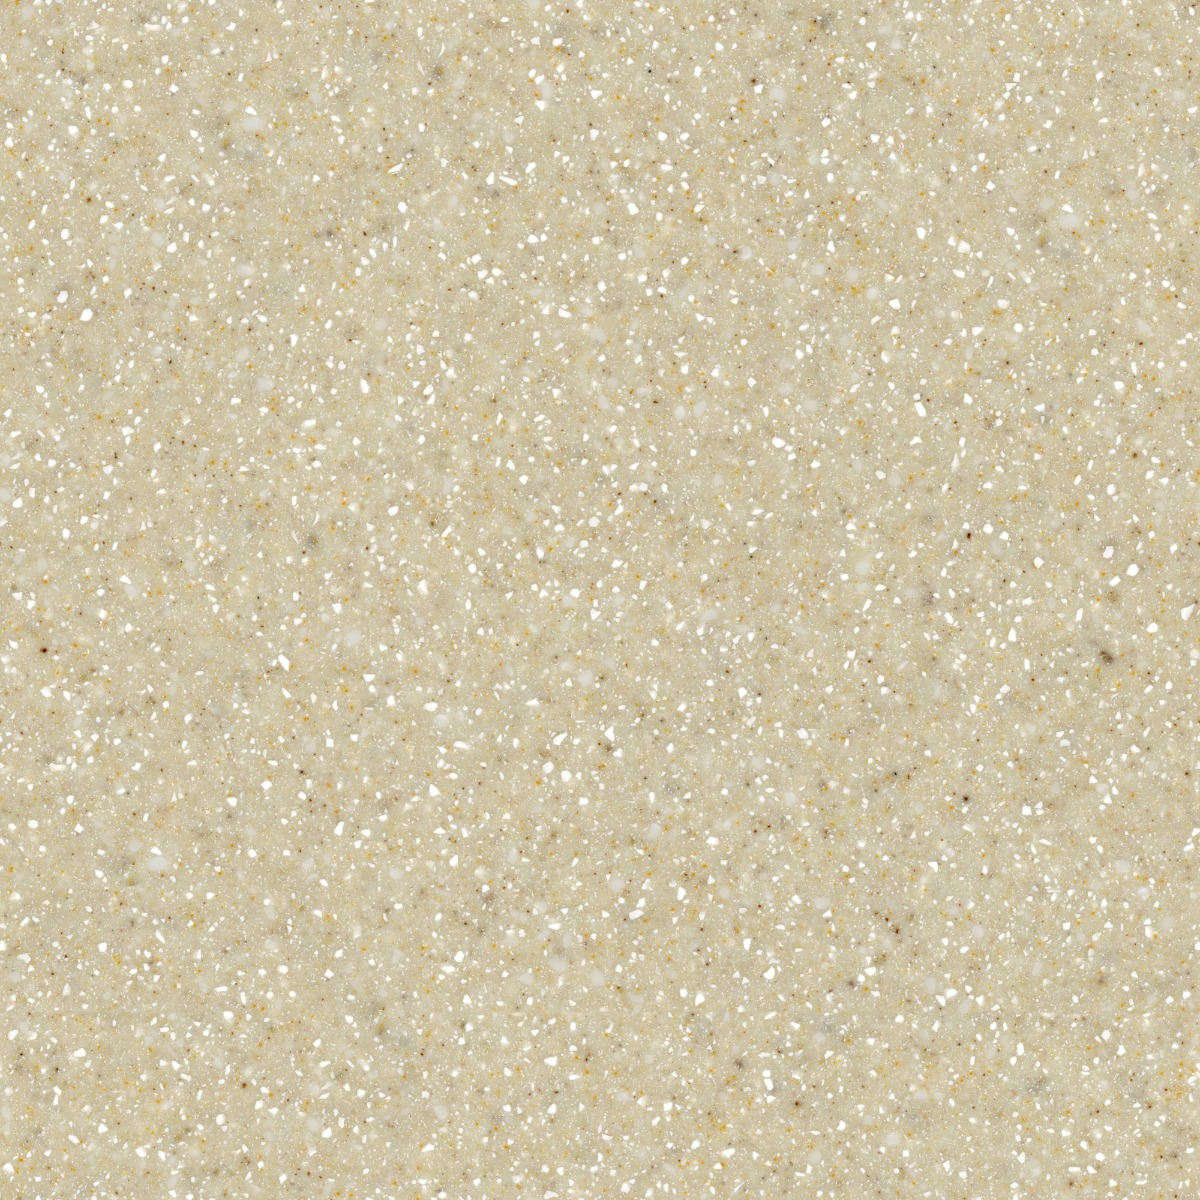 A seamless surfacing texture with t-102 hidden glen units arranged in a None pattern